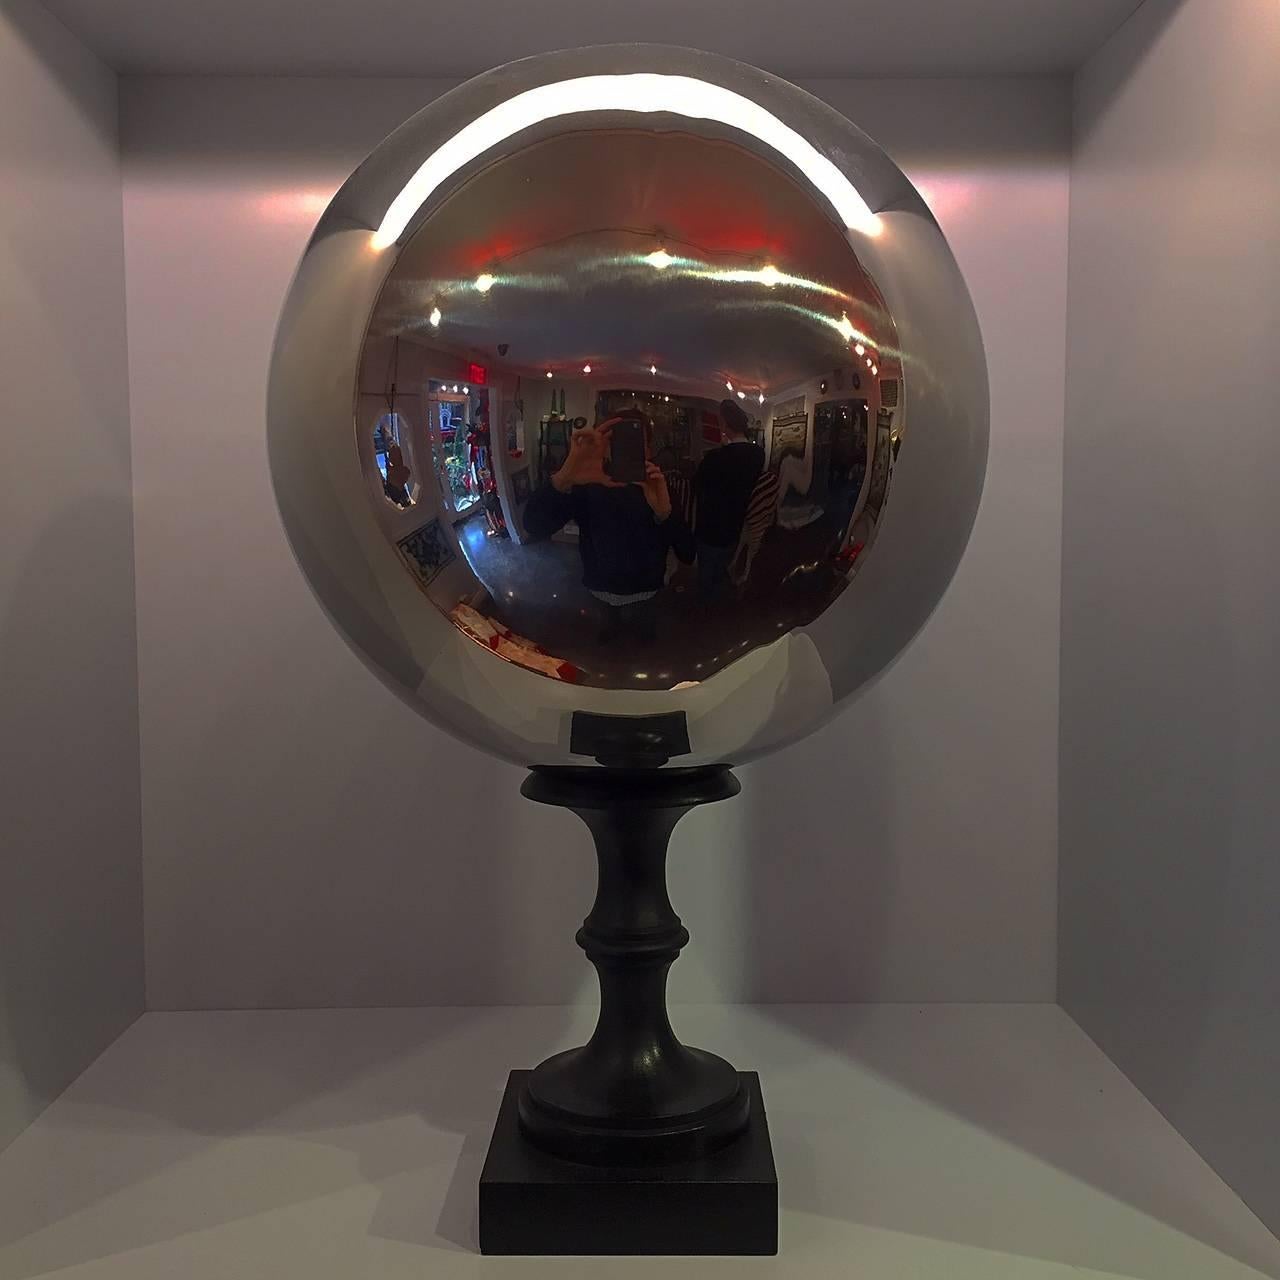 A stainless steel 'butler's ball' mounted on a turned wooden base. Butler's balls are used in dining rooms for the butler to survey the progress of a dinner party by looking into the reflection the ball placed on the side board without having to